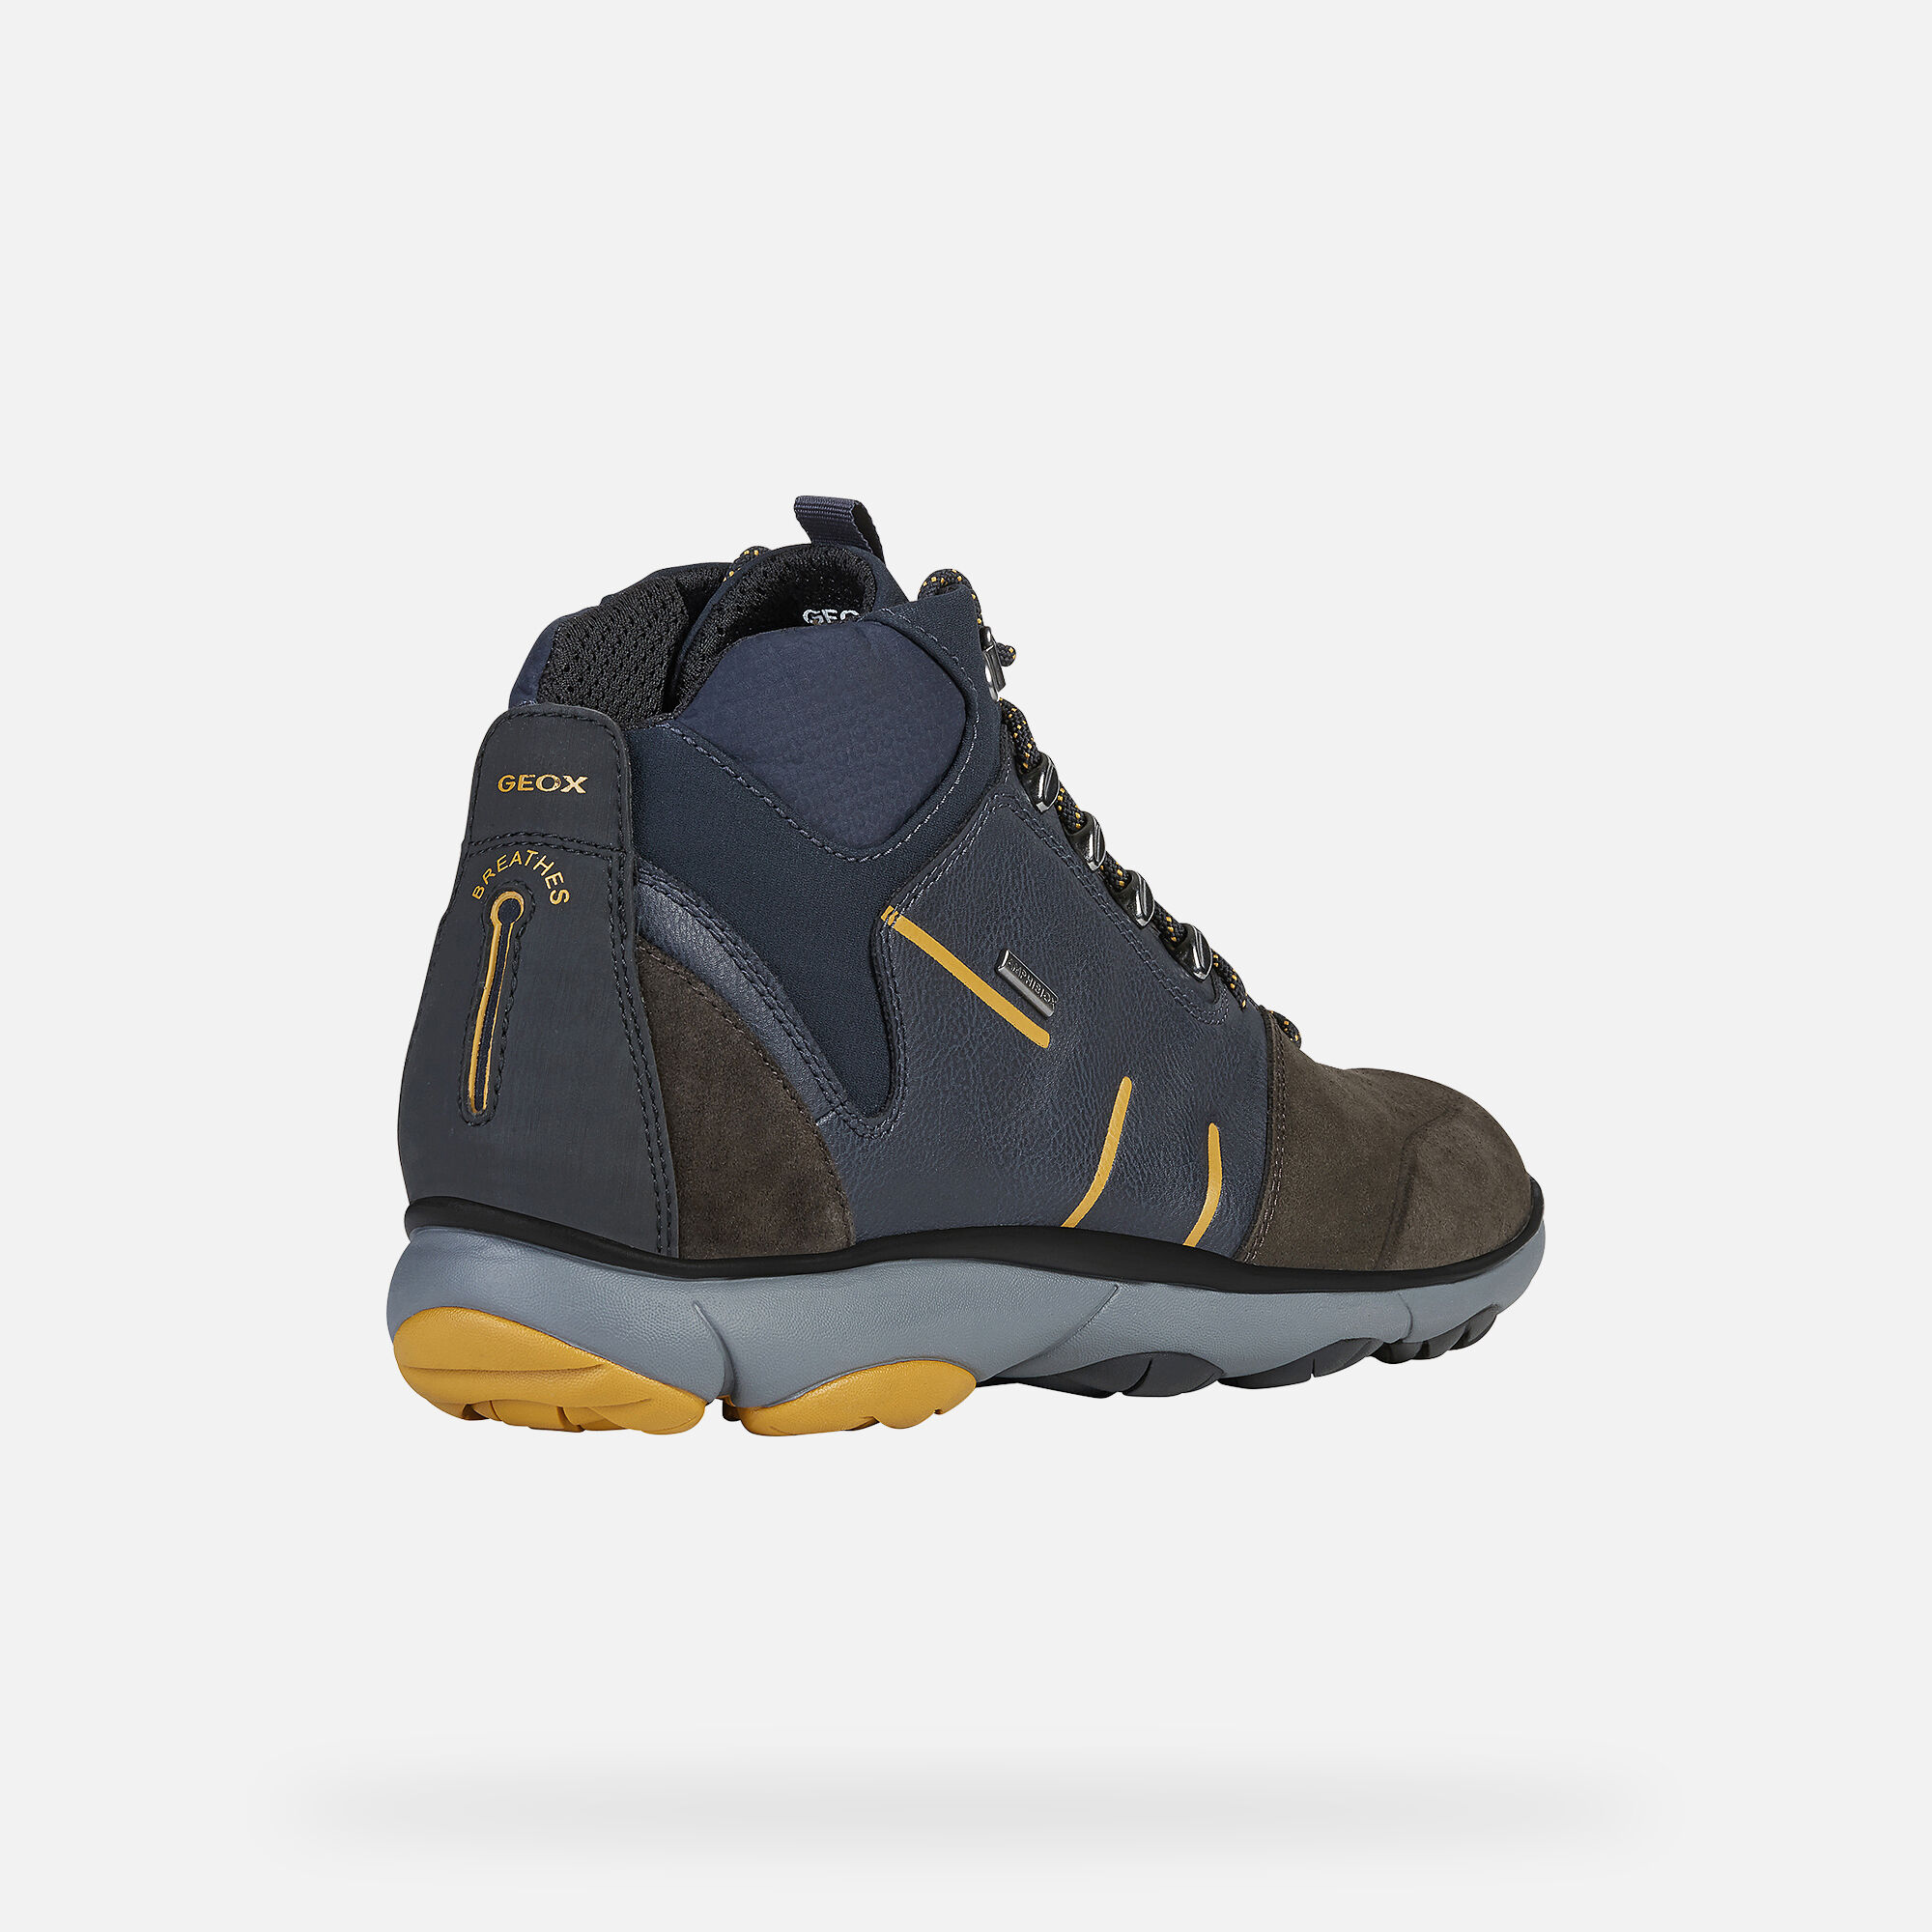 geox gore tex boots